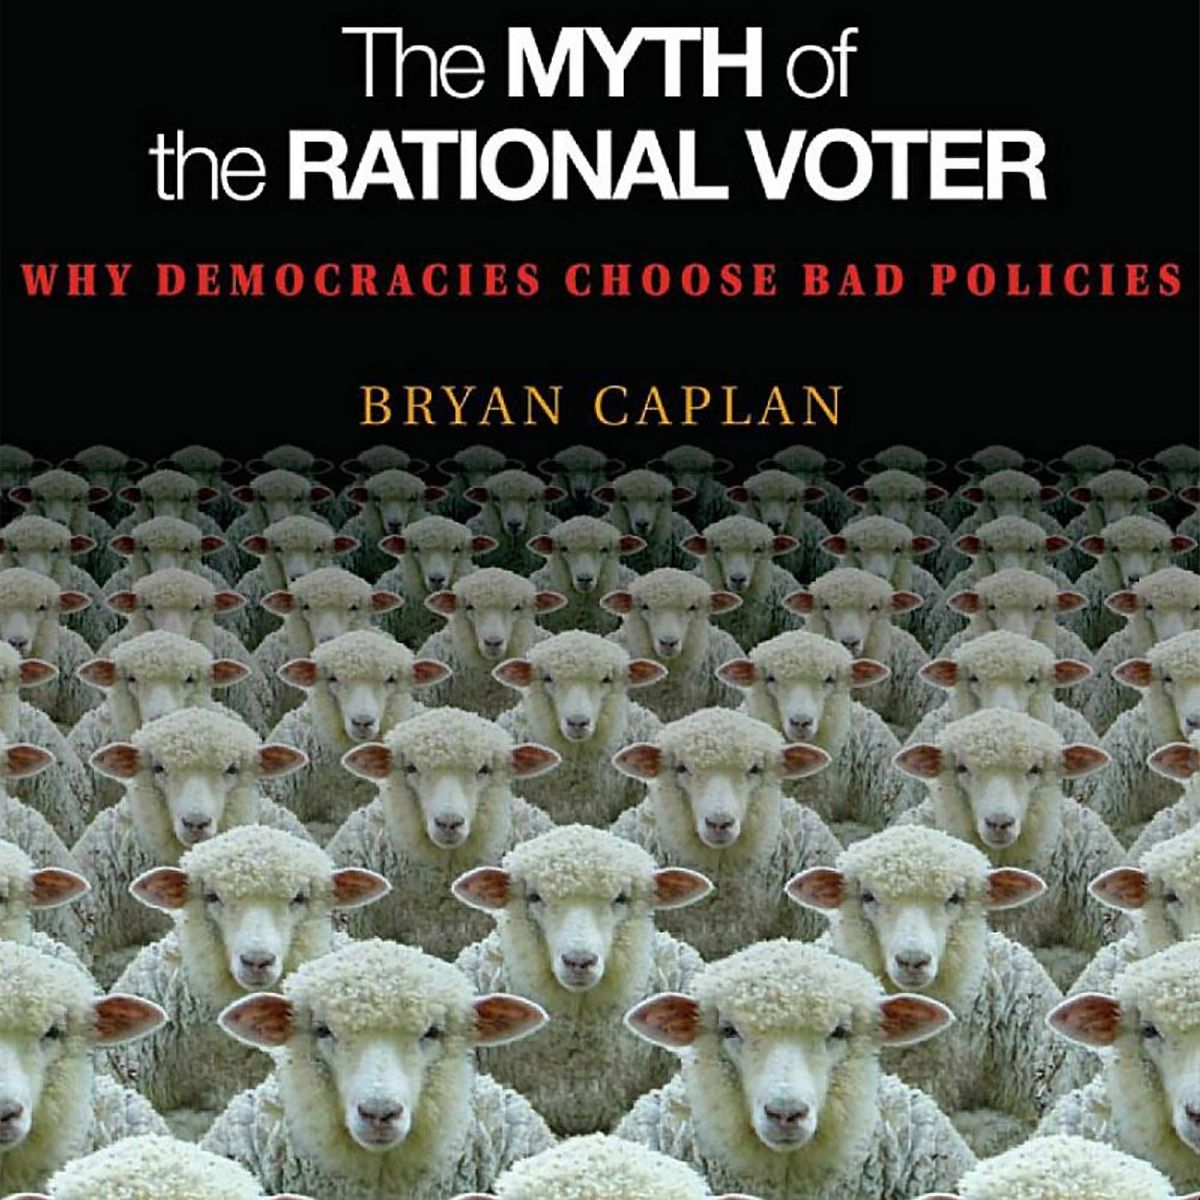 Read This: The Myth of the Rational Voter: Why Democracies Choose Bad Policies